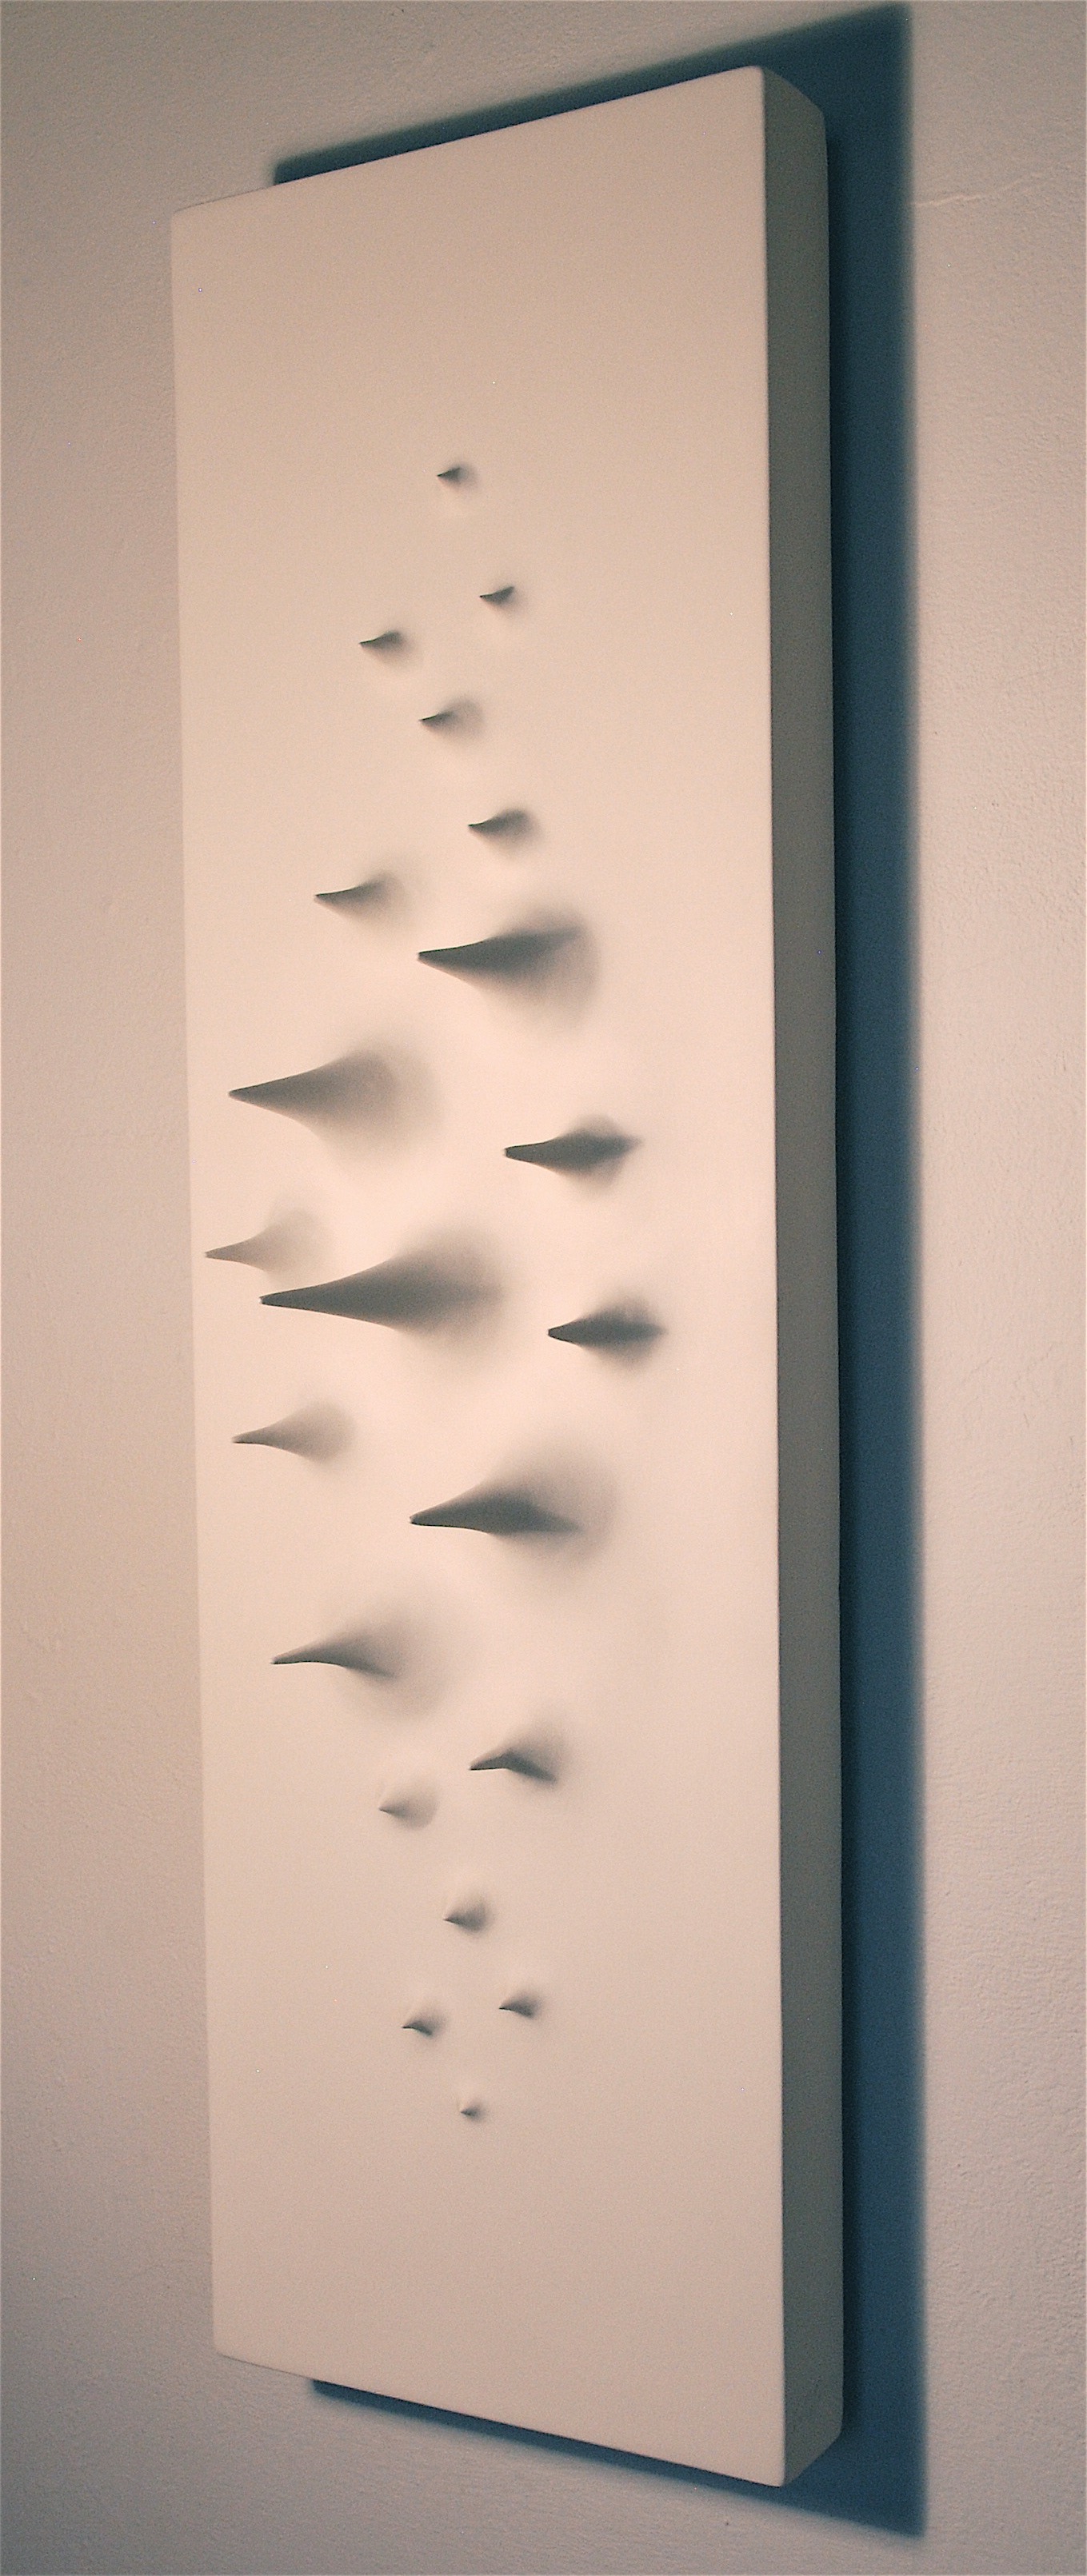 Thomas Coffin - Spikes (white), 40"h x 12"w x 10"d, mixed media sculptural wall relief